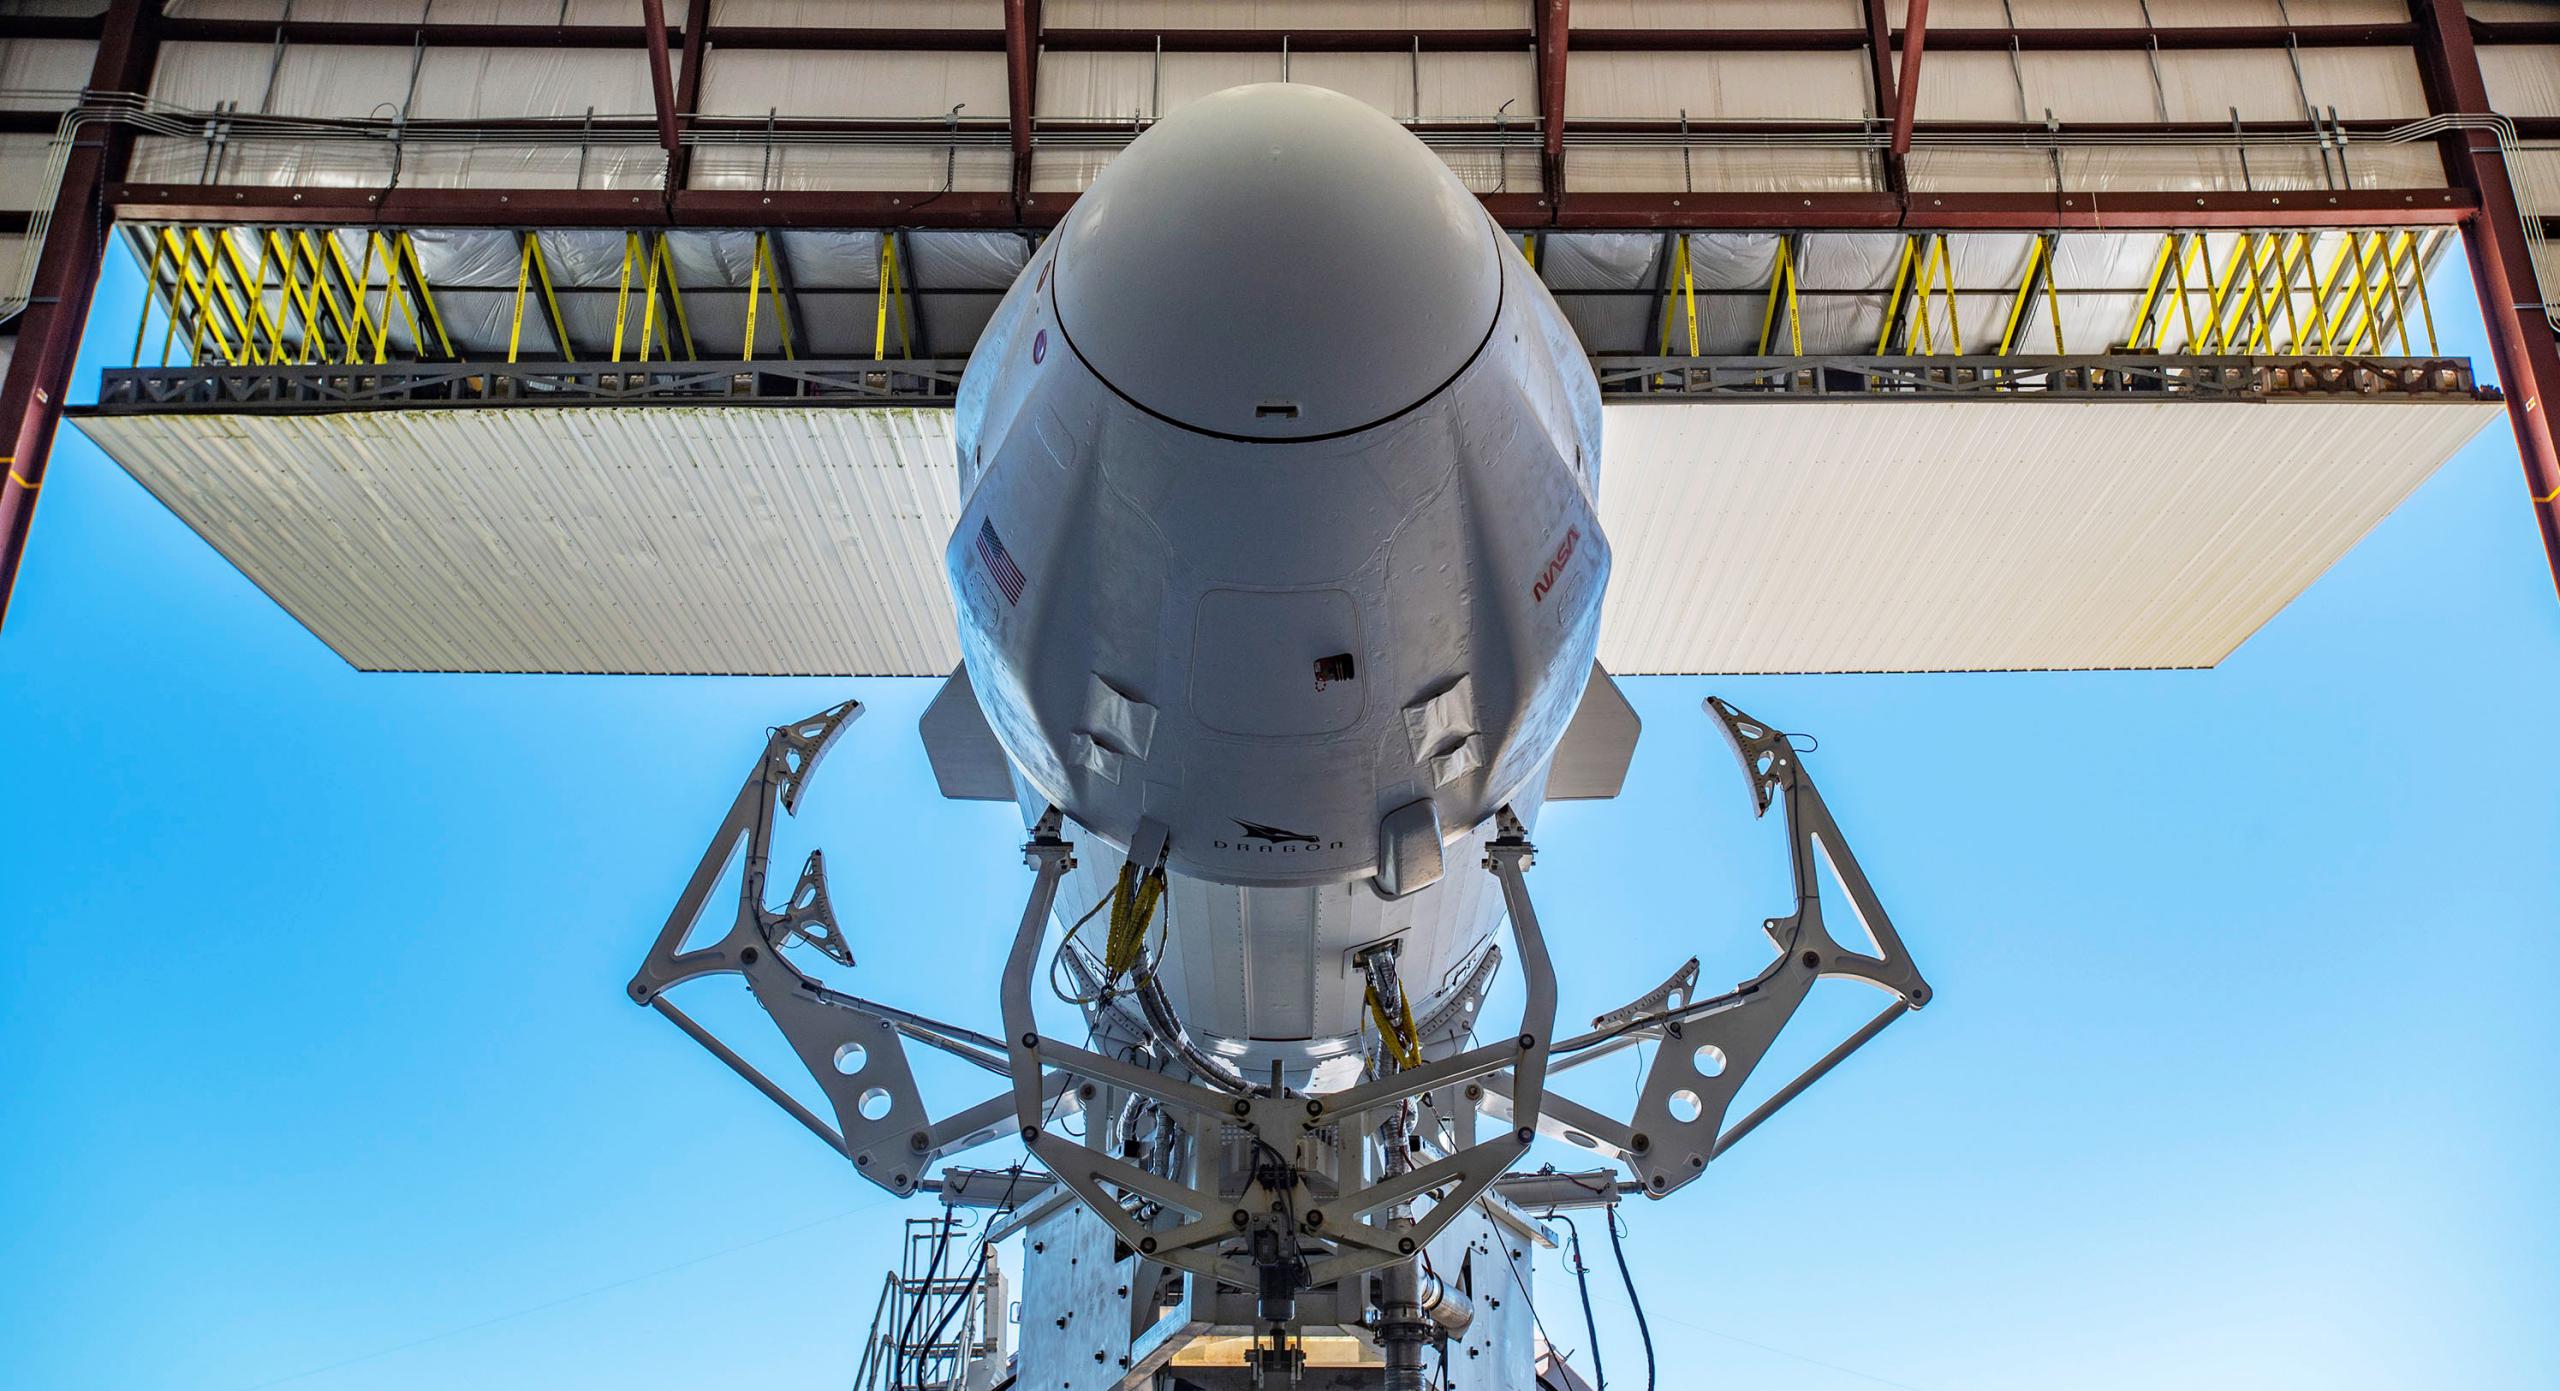 CRS-25 Dragon C208 F9 B1067 39A 071222 (SpaceX) rollout 4 crop (c)